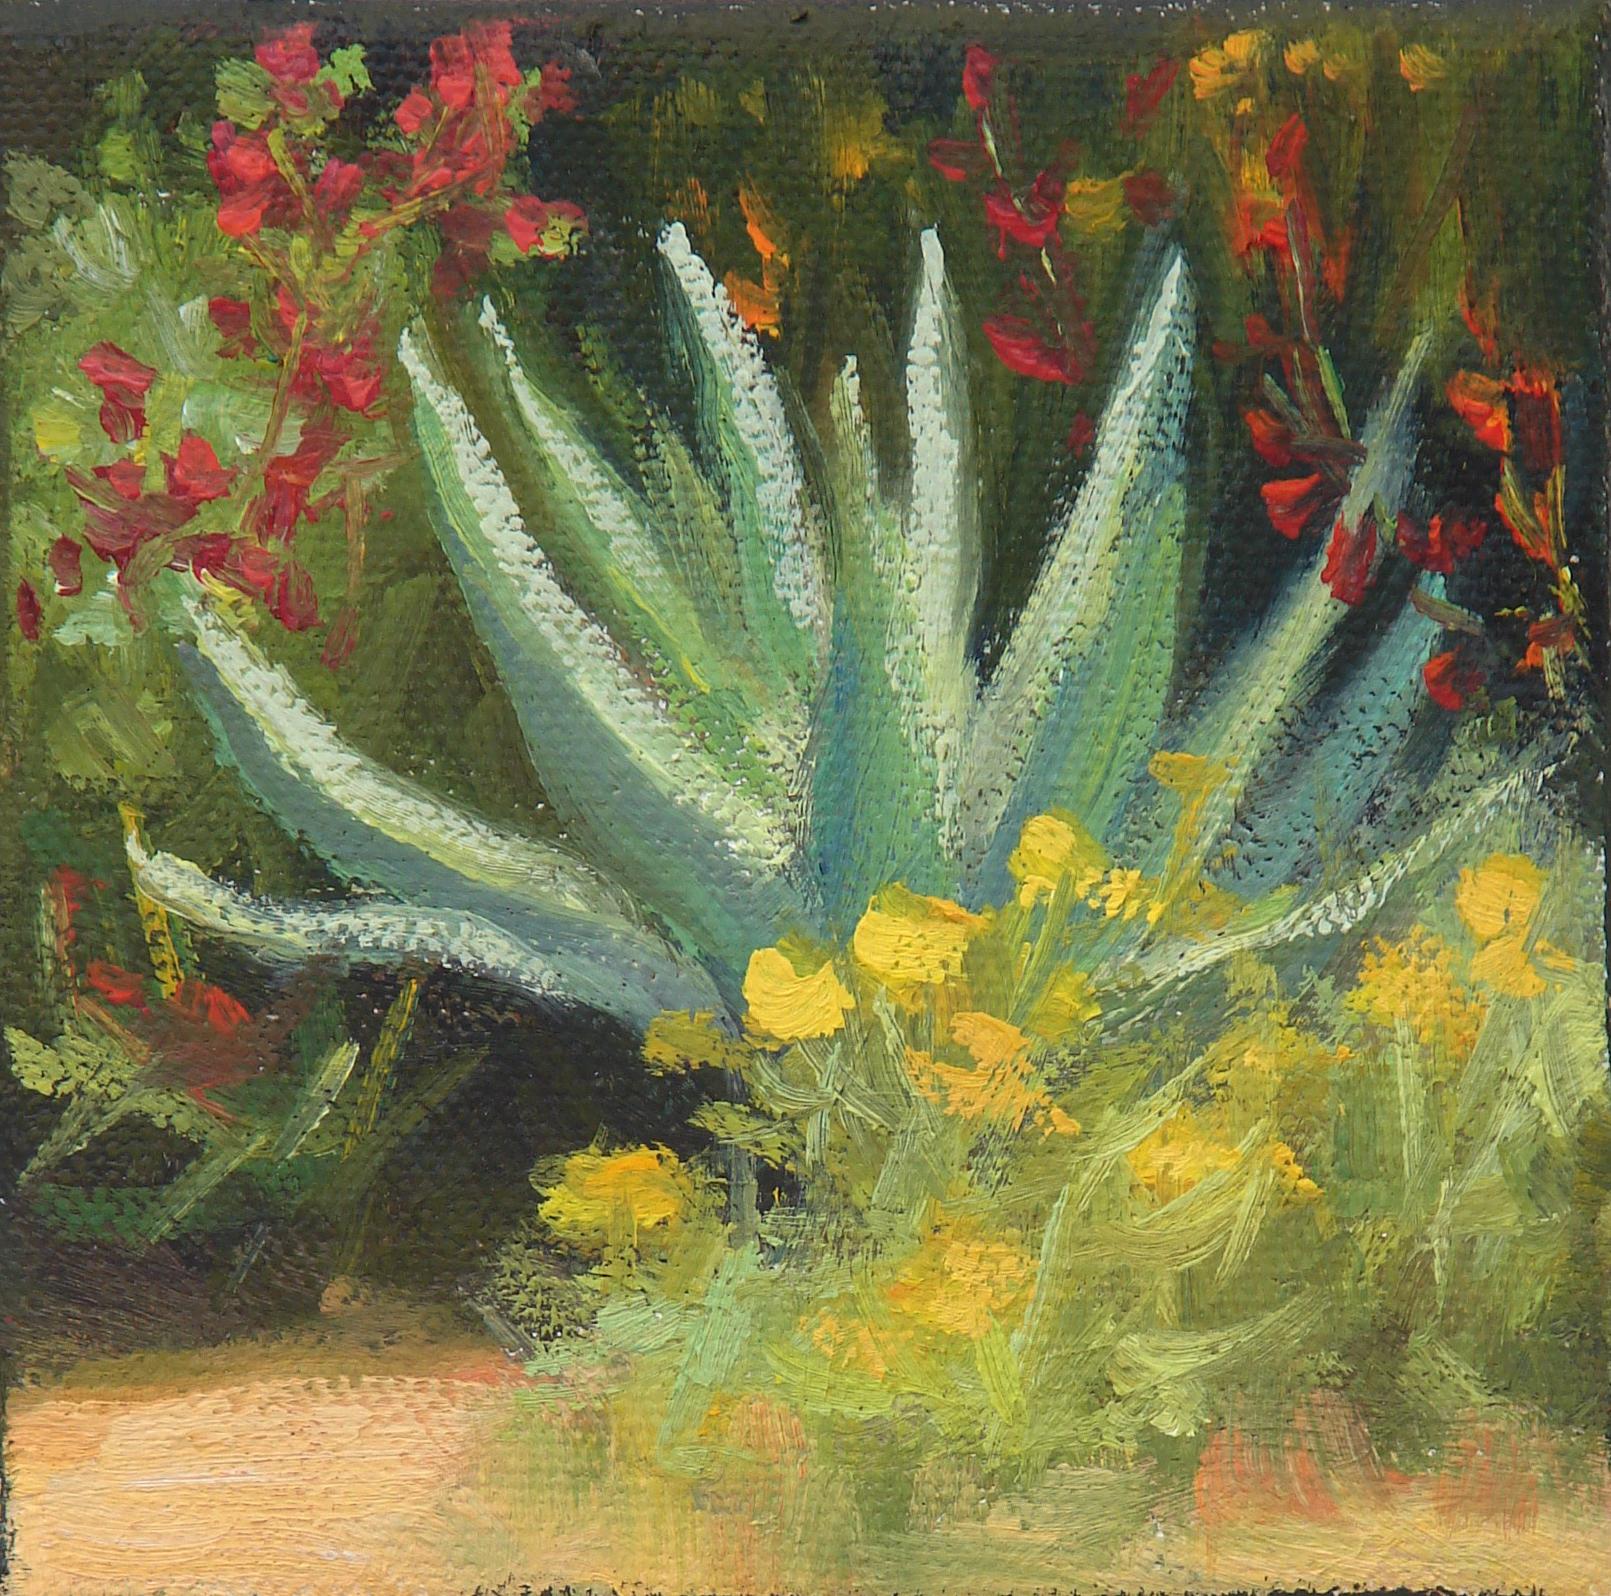 Agave with Wildflowers - Art by Sherri Aldawood